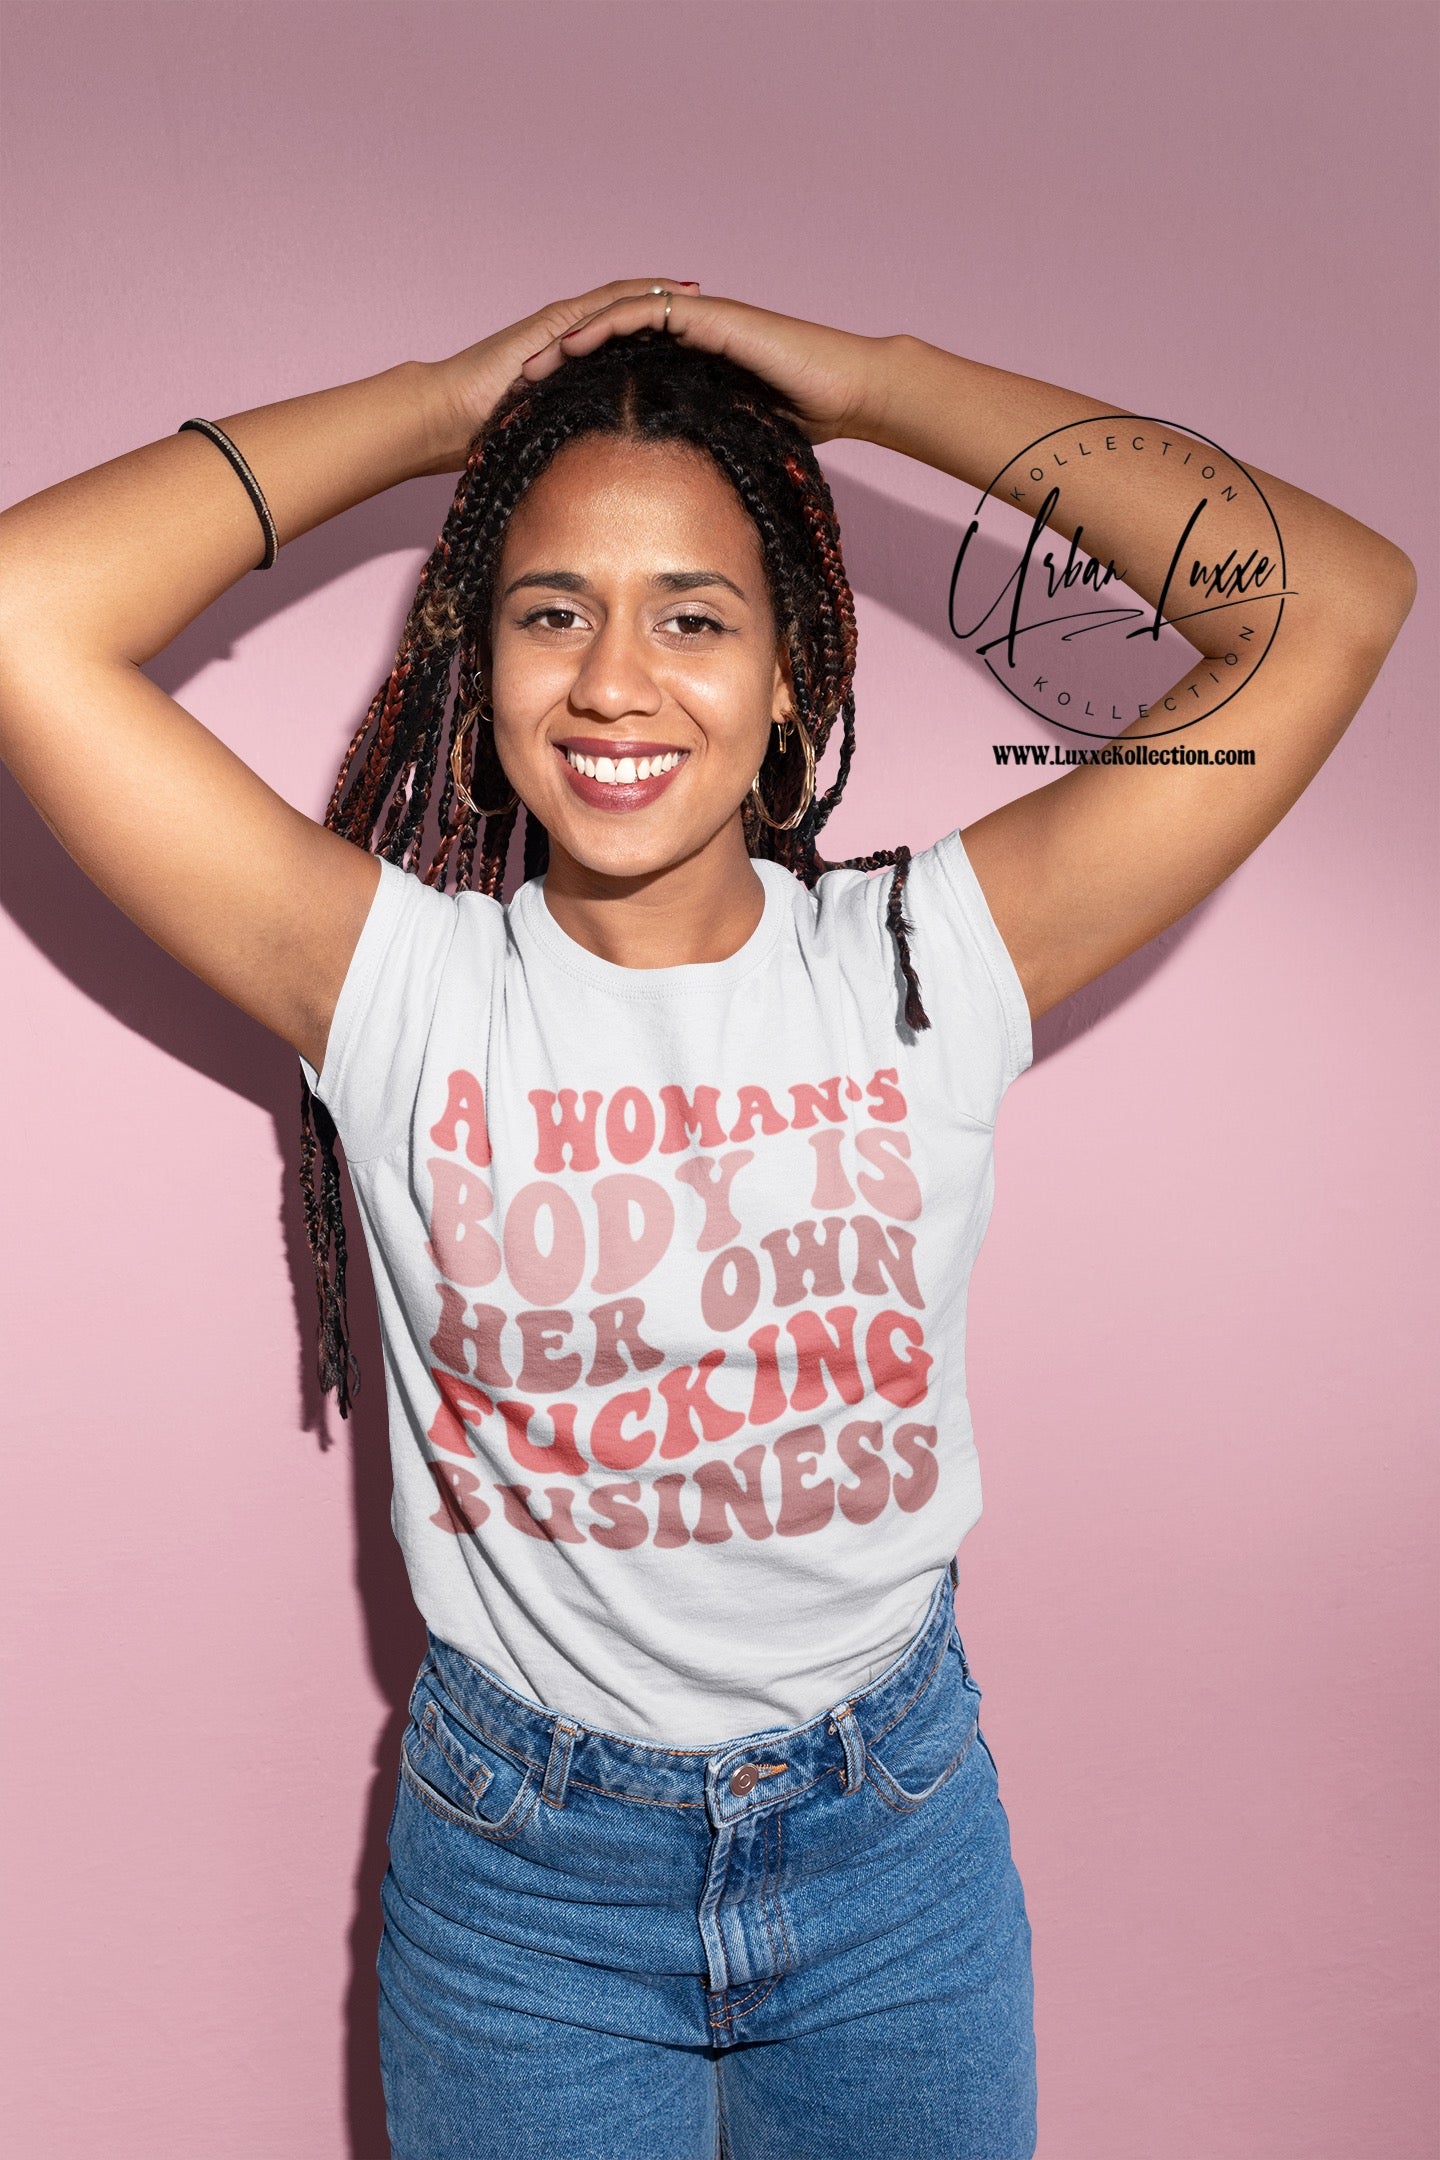 A Woman’s Body Is Her Own Fucking Business T-shirt